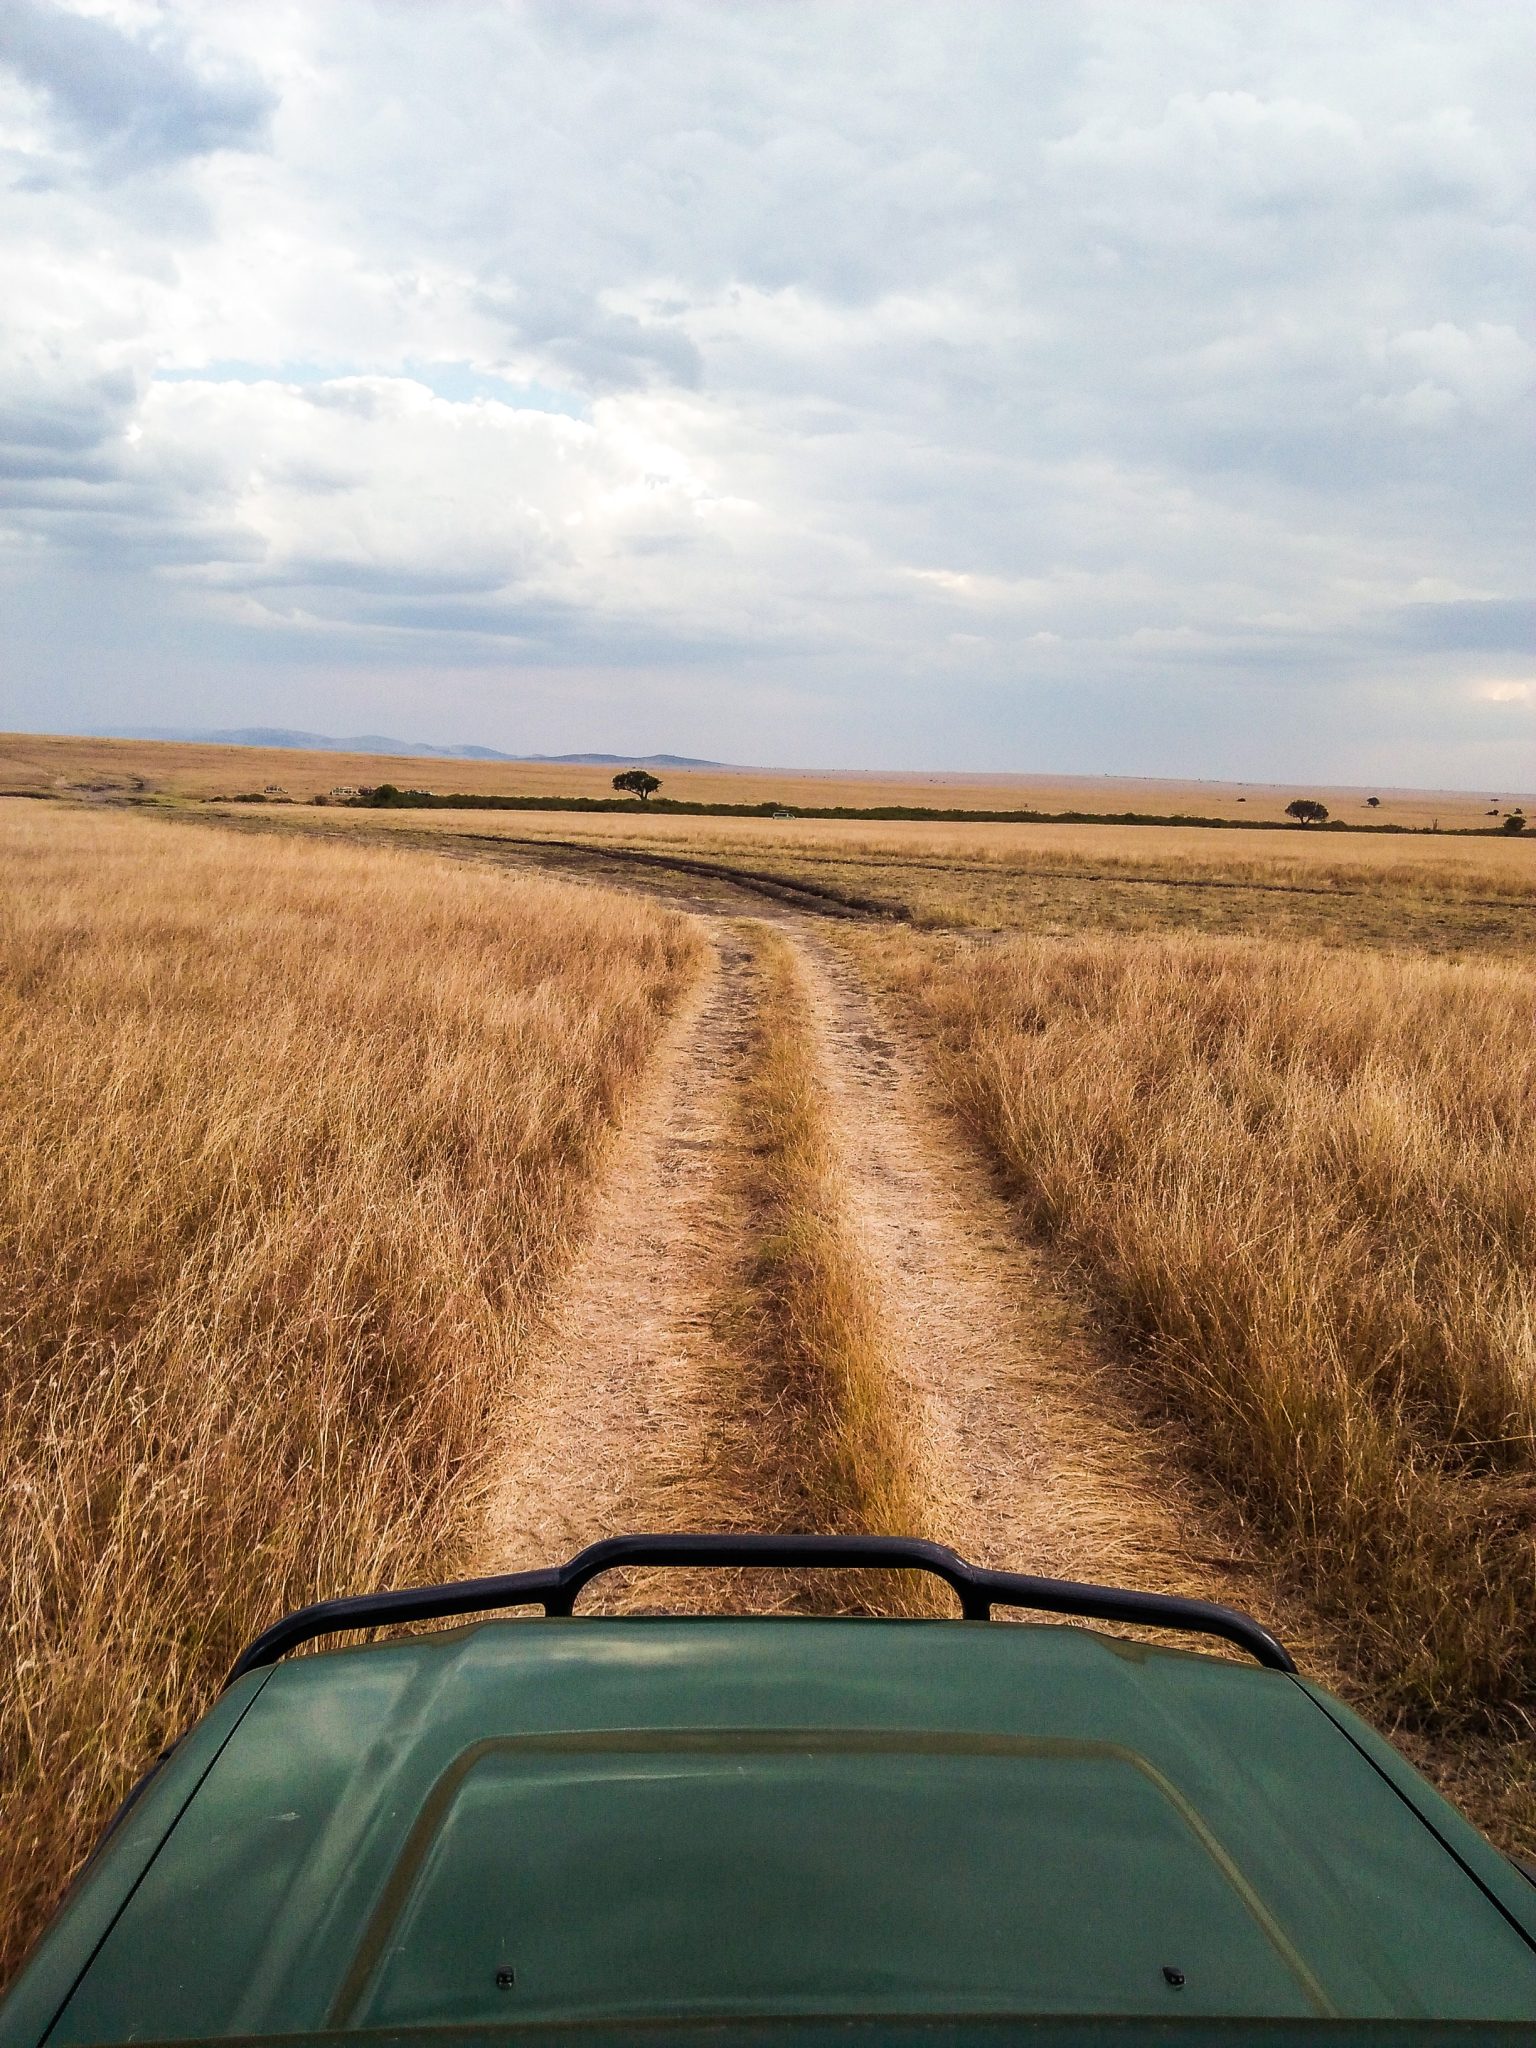 A few of the grasslands and driving trail from our safari vehicle on the WTN Kenya Tour for women